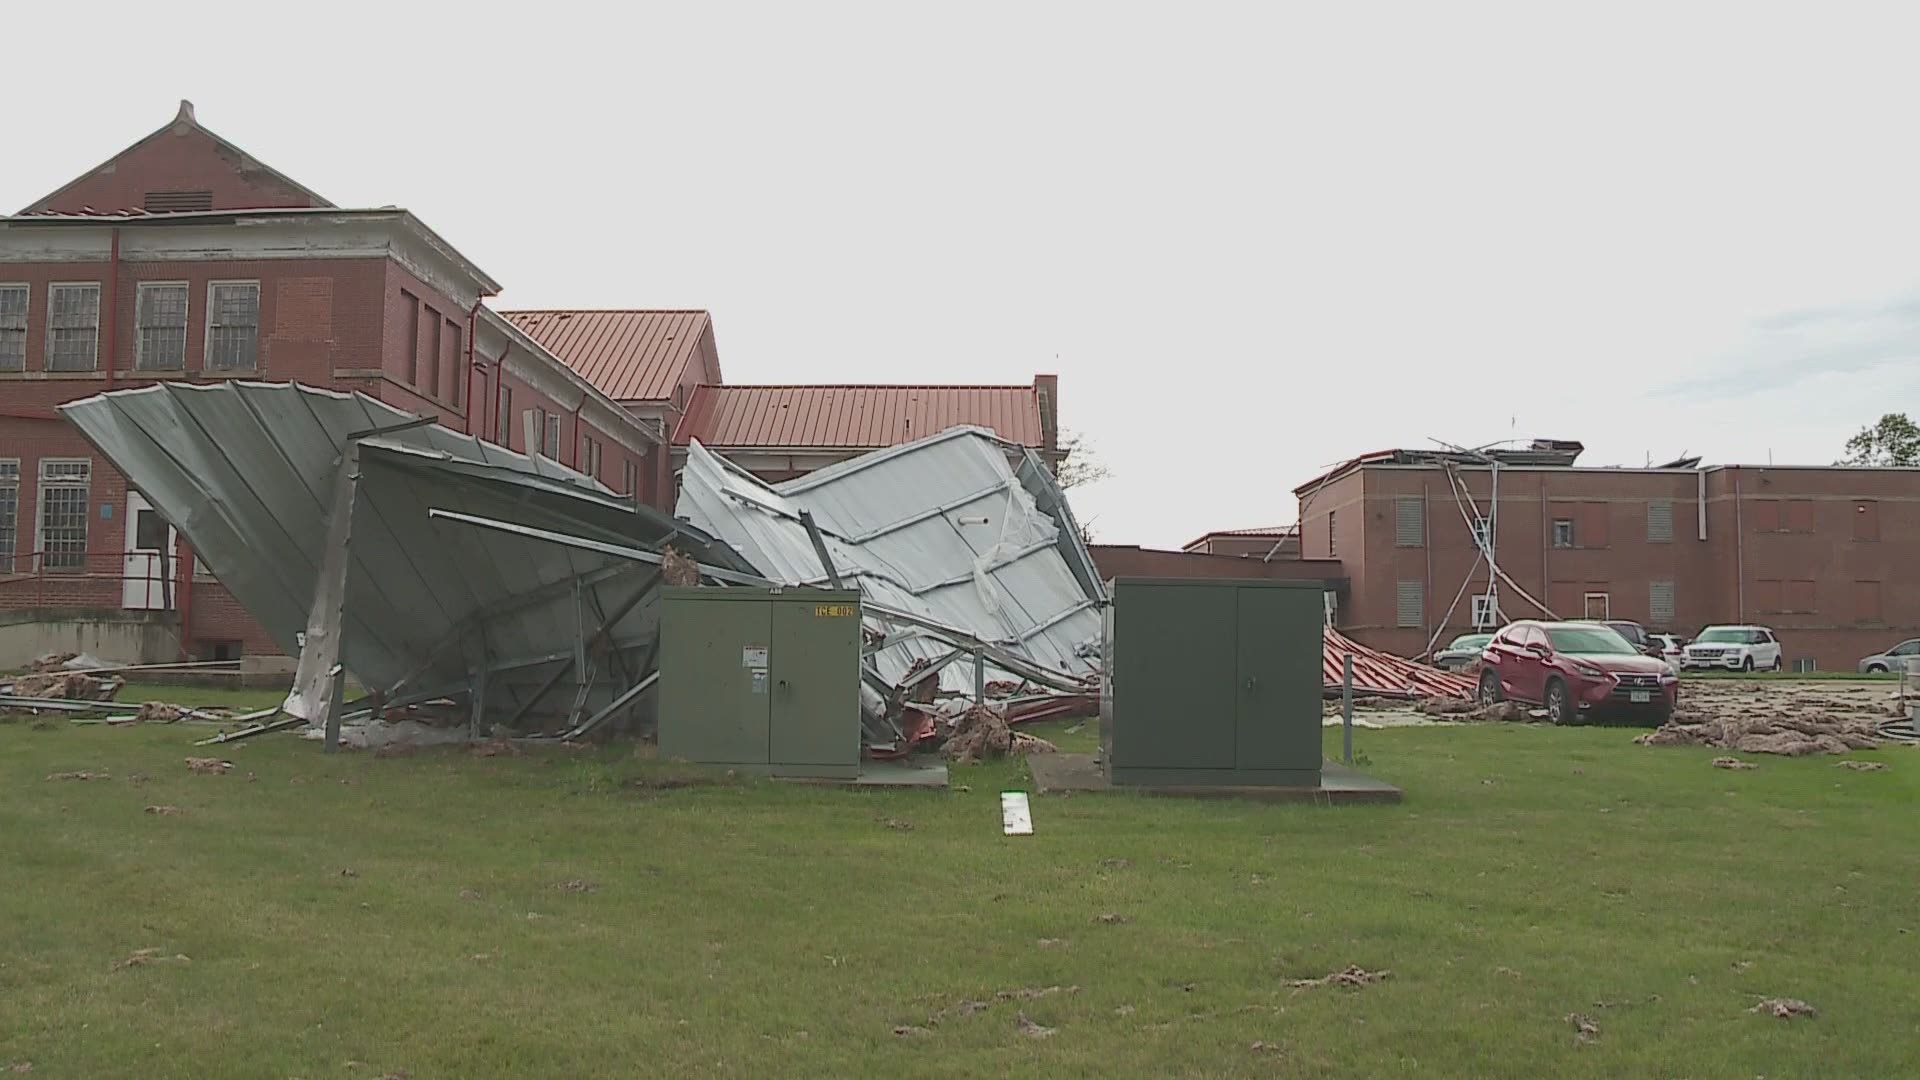 Buildings throughout Woodward, Iowa saw varying degrees of damage Monday after a storm with high winds and heavy rain rolled through the area.